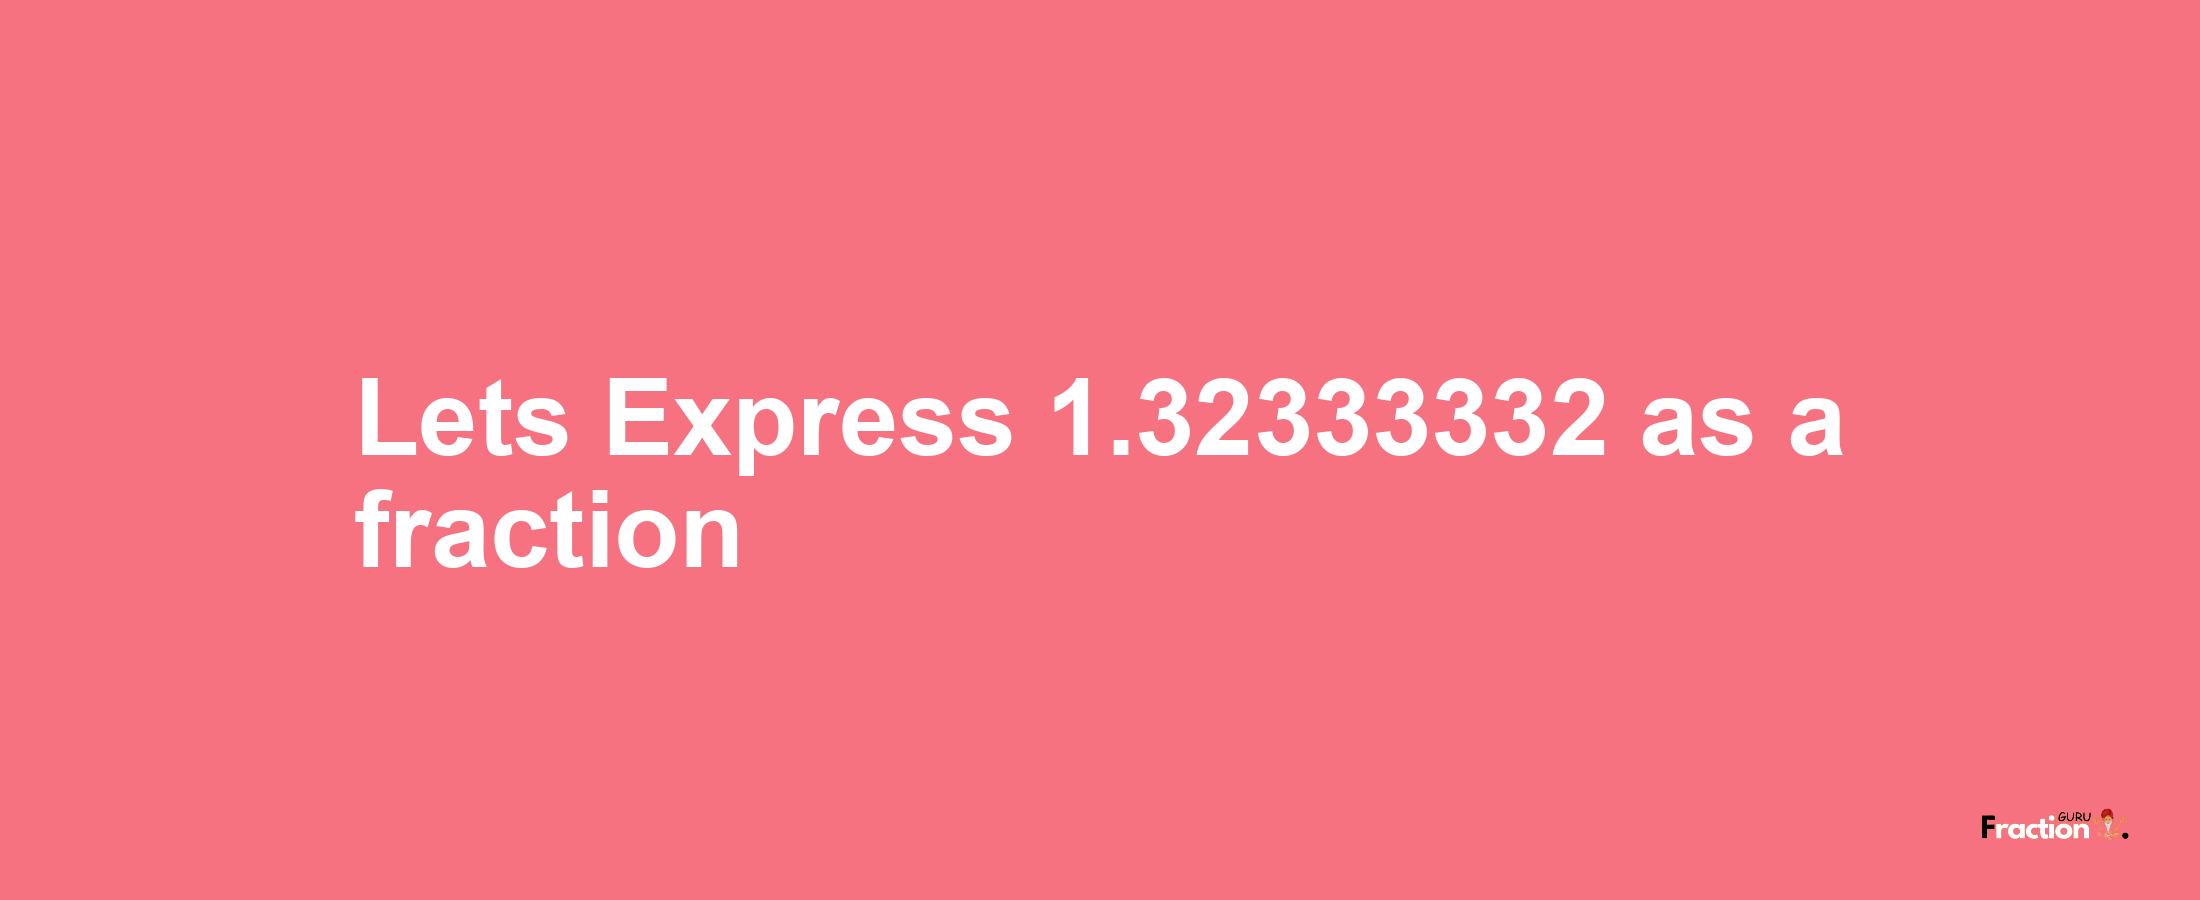 Lets Express 1.32333332 as afraction